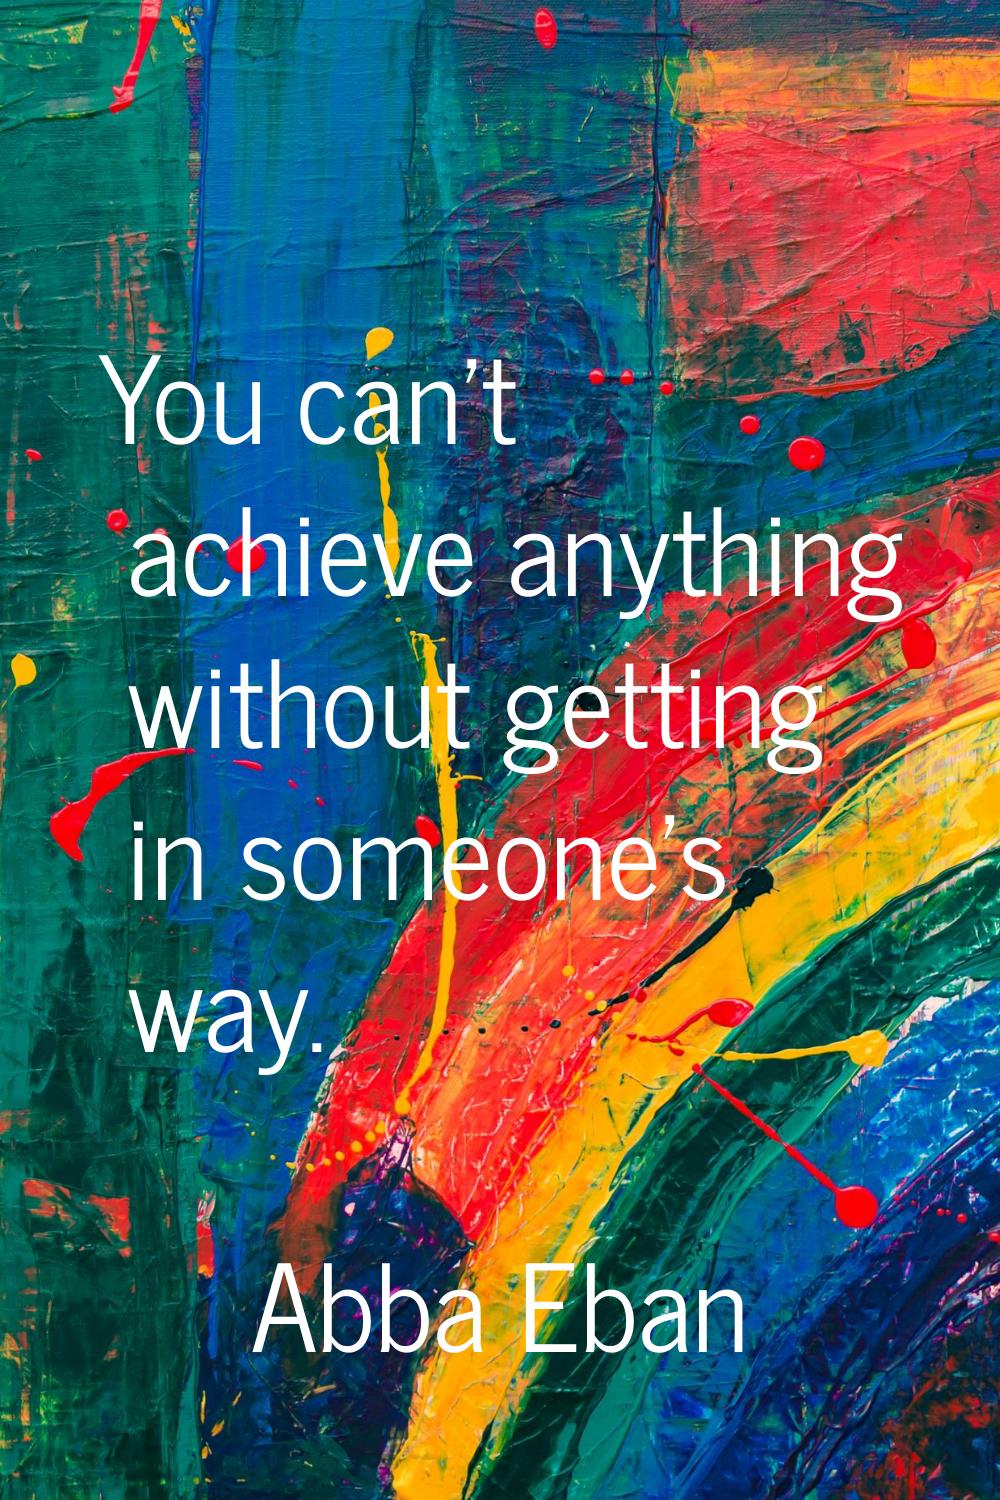 You can't achieve anything without getting in someone's way.